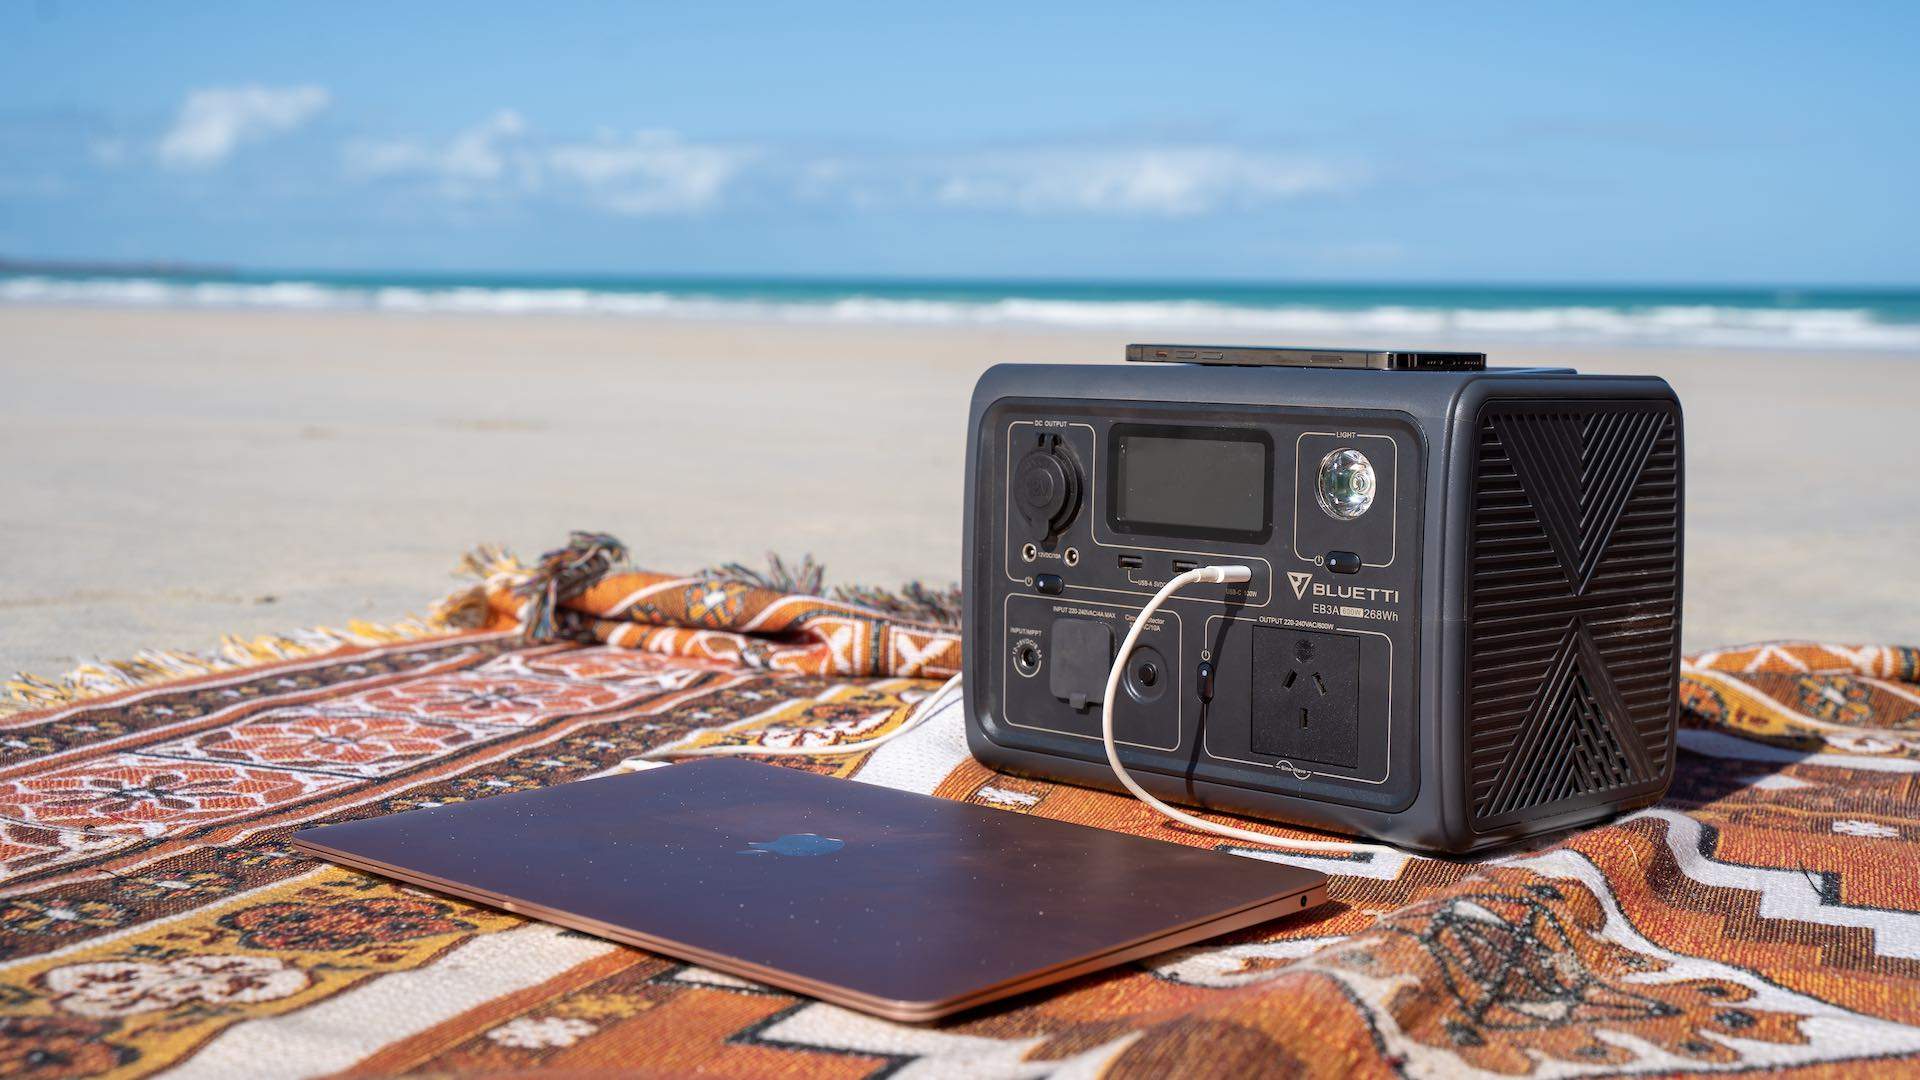 Stay Charged on Your Summer Adventures with This Renewable Power Tech